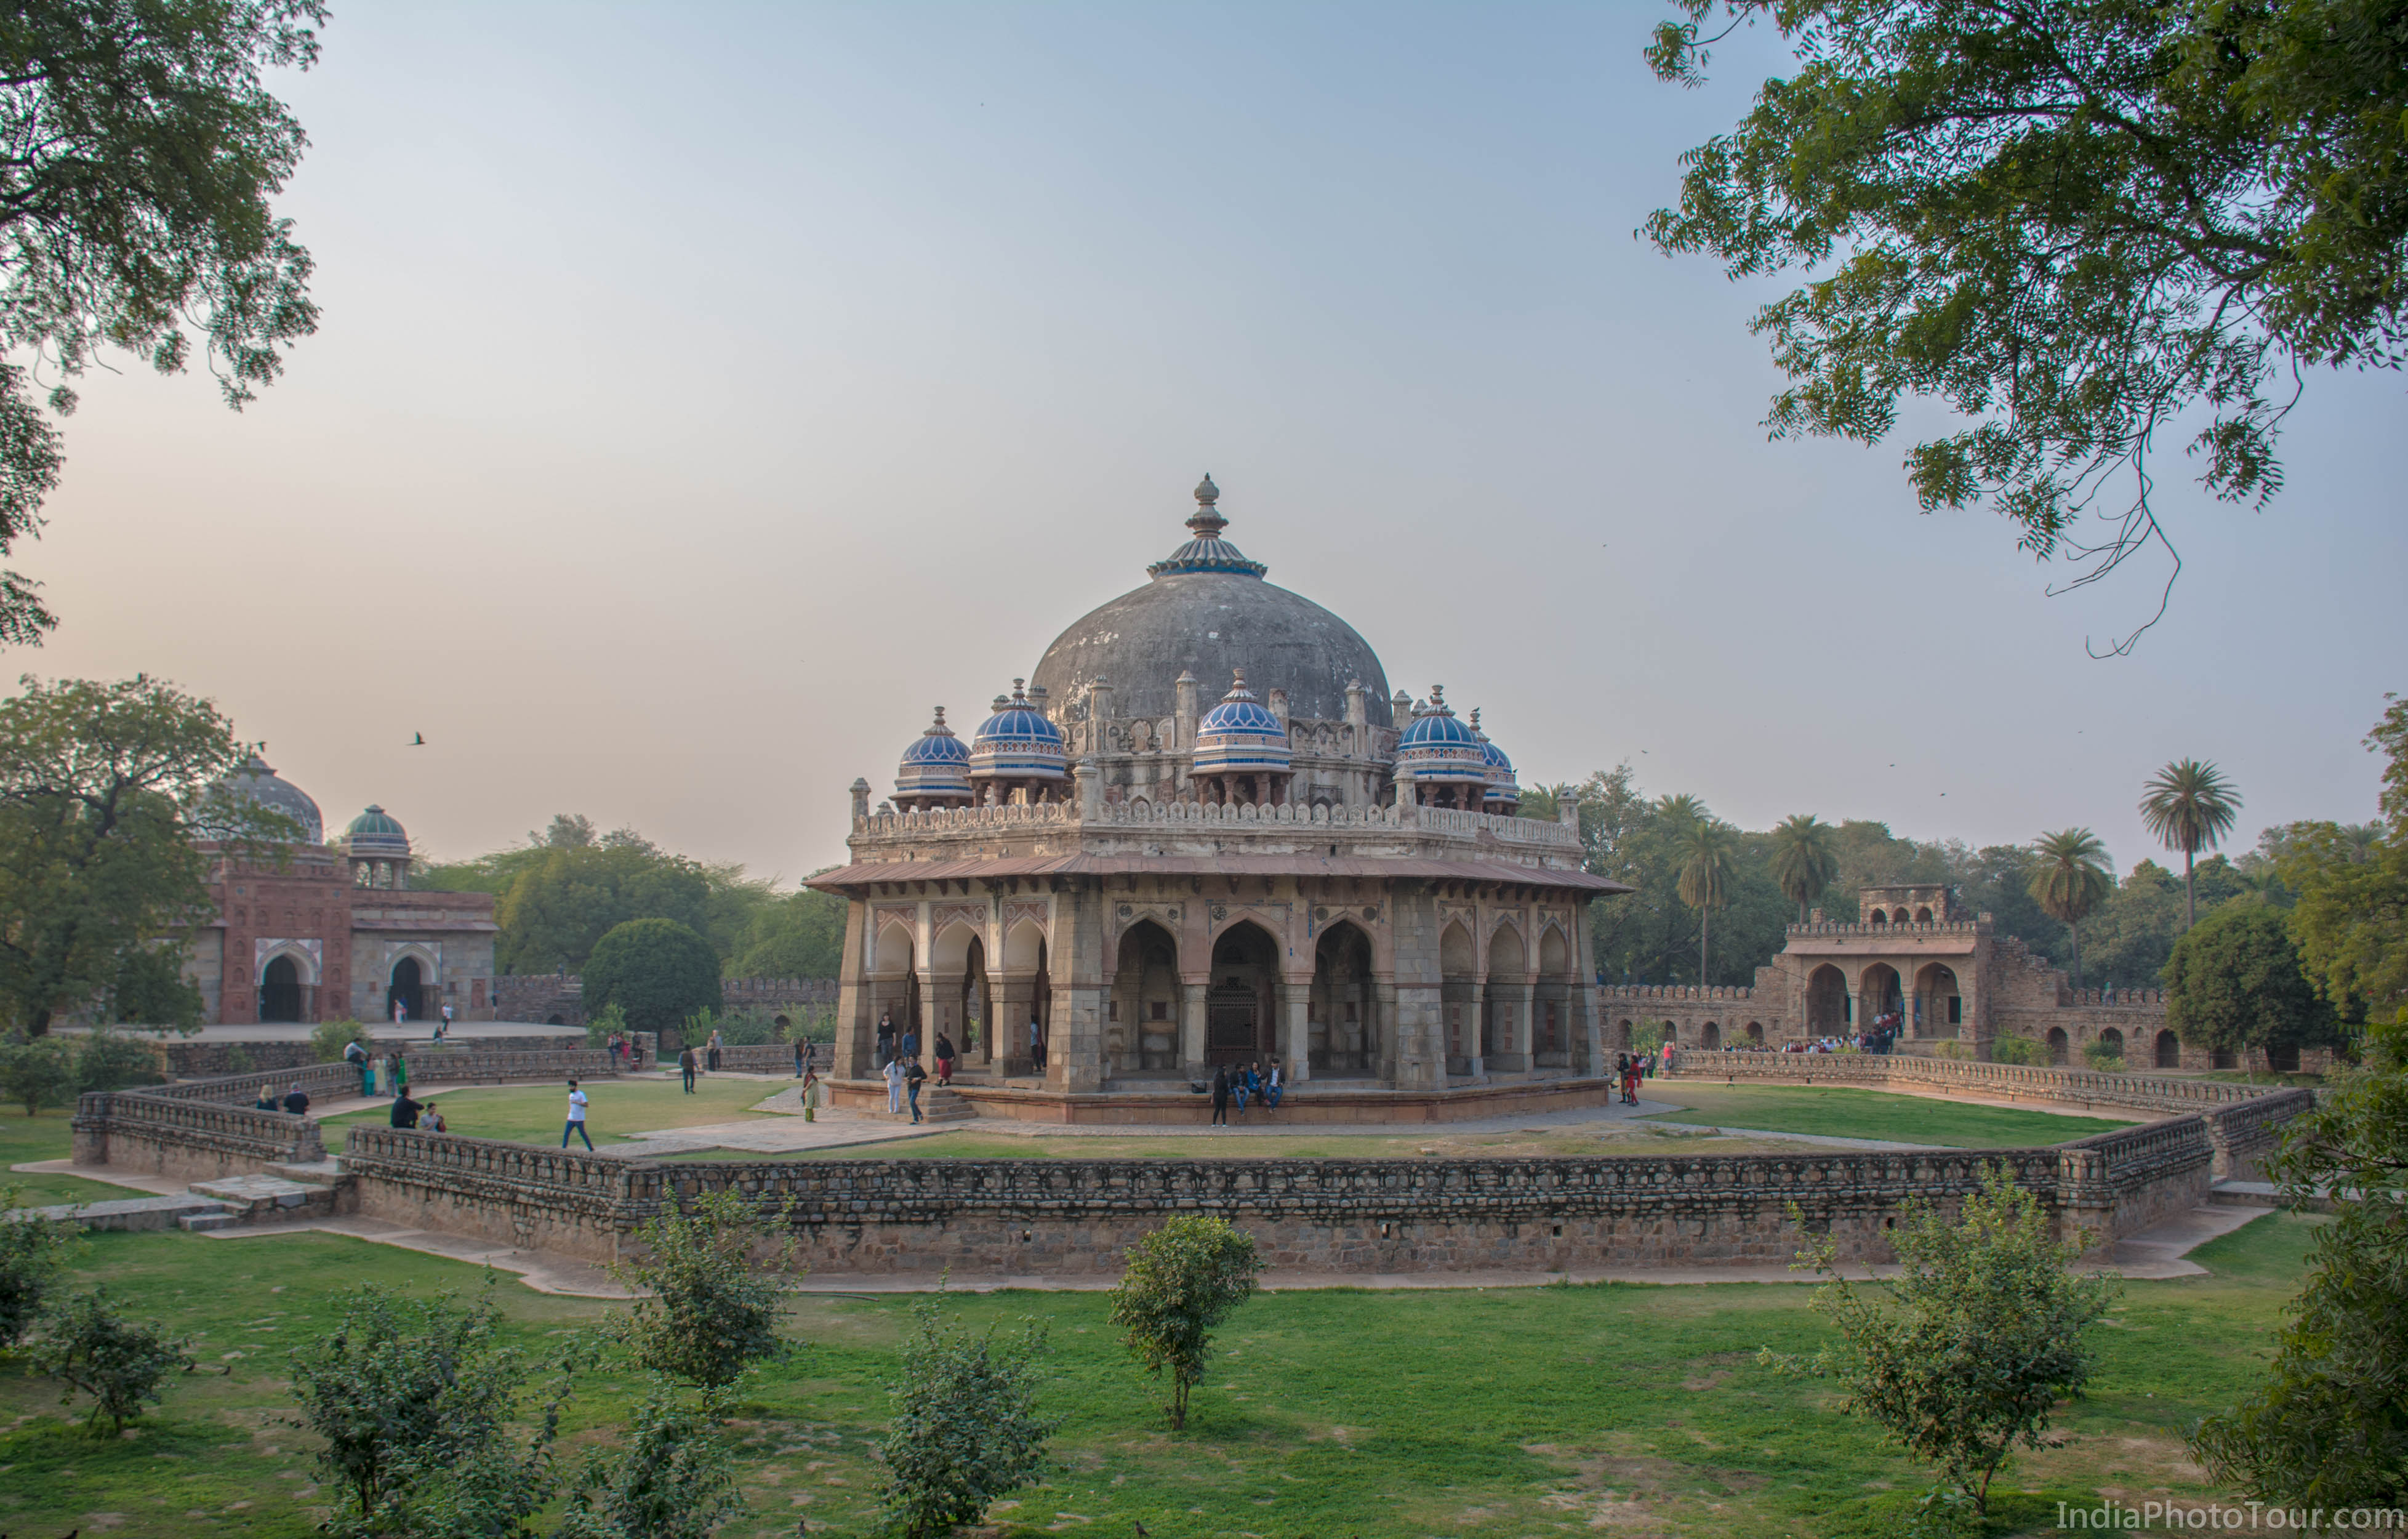 Another shot of Isa Khan's tomb from it's wall